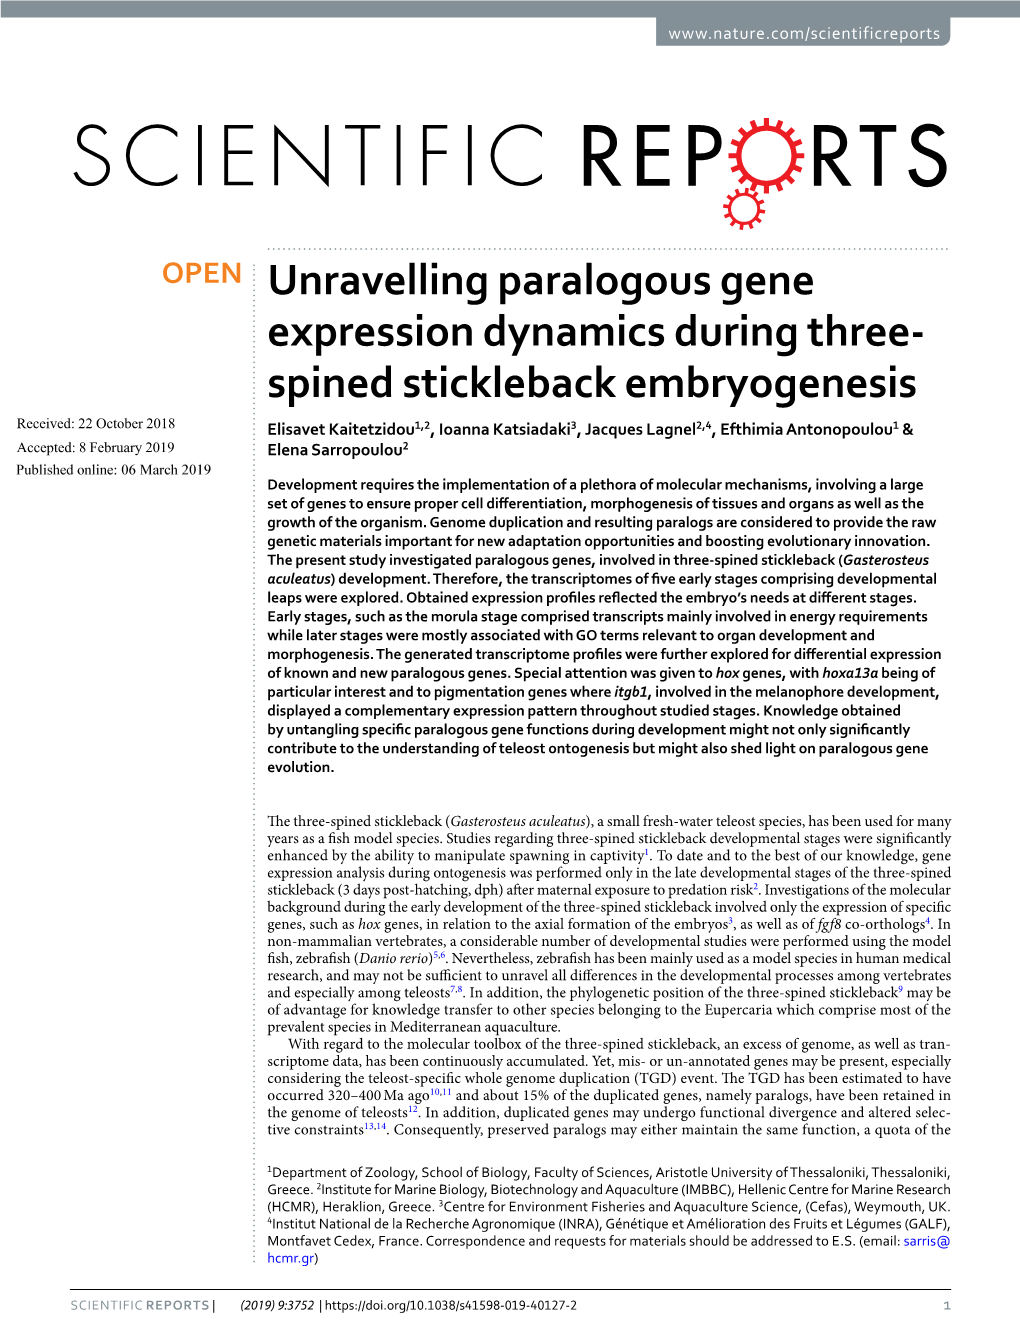 Unravelling Paralogous Gene Expression Dynamics During Three